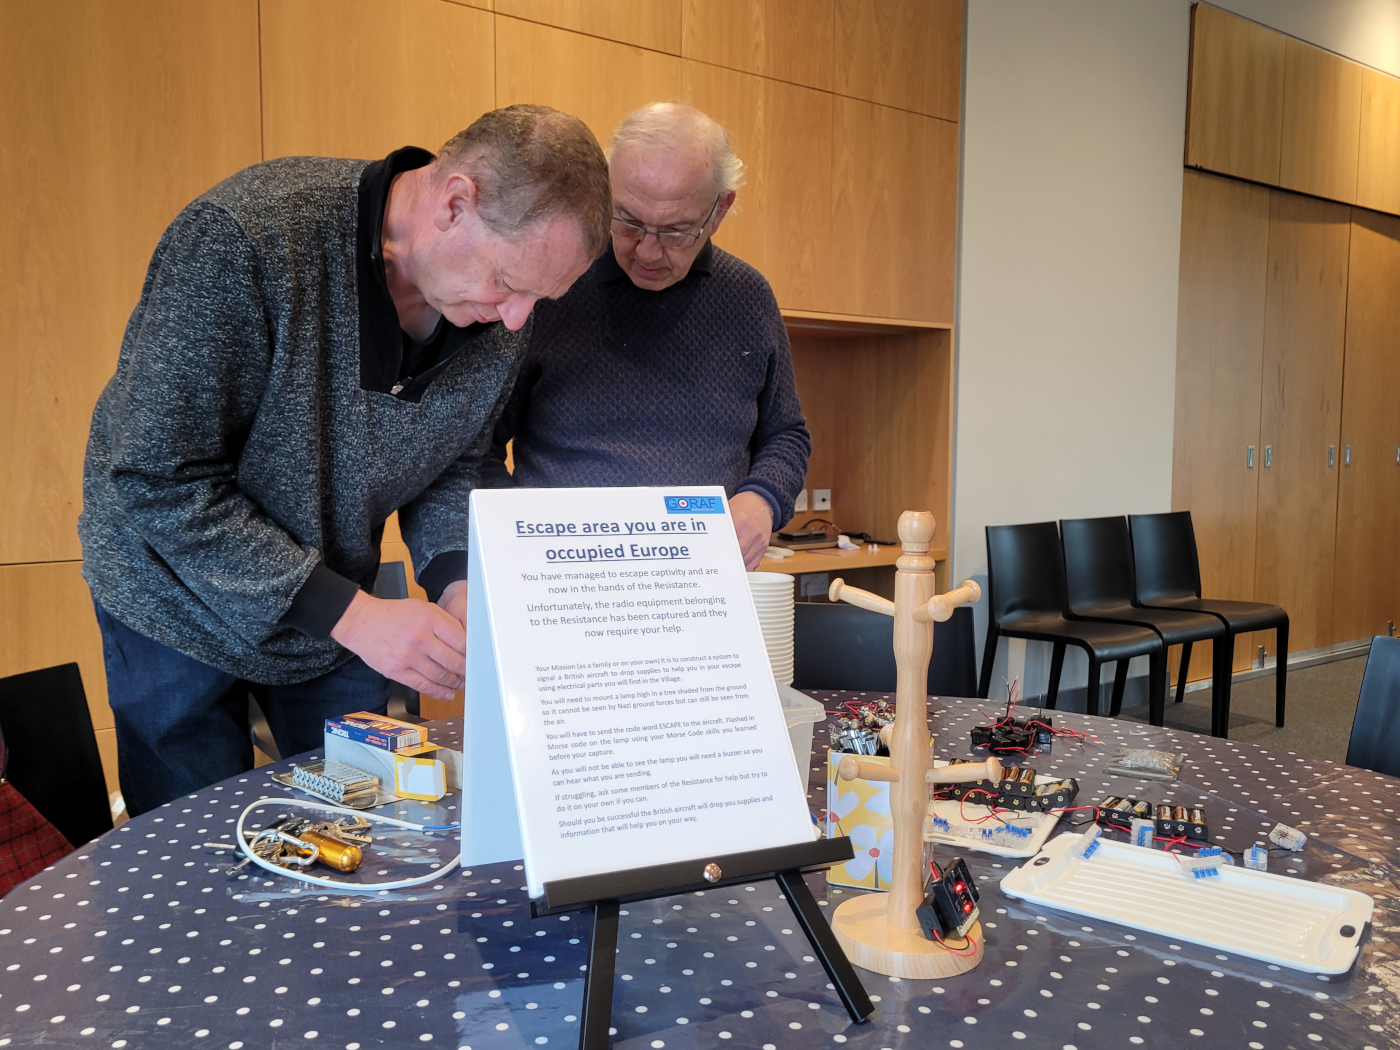 Andy and Phil debugging the Morse signalling system build